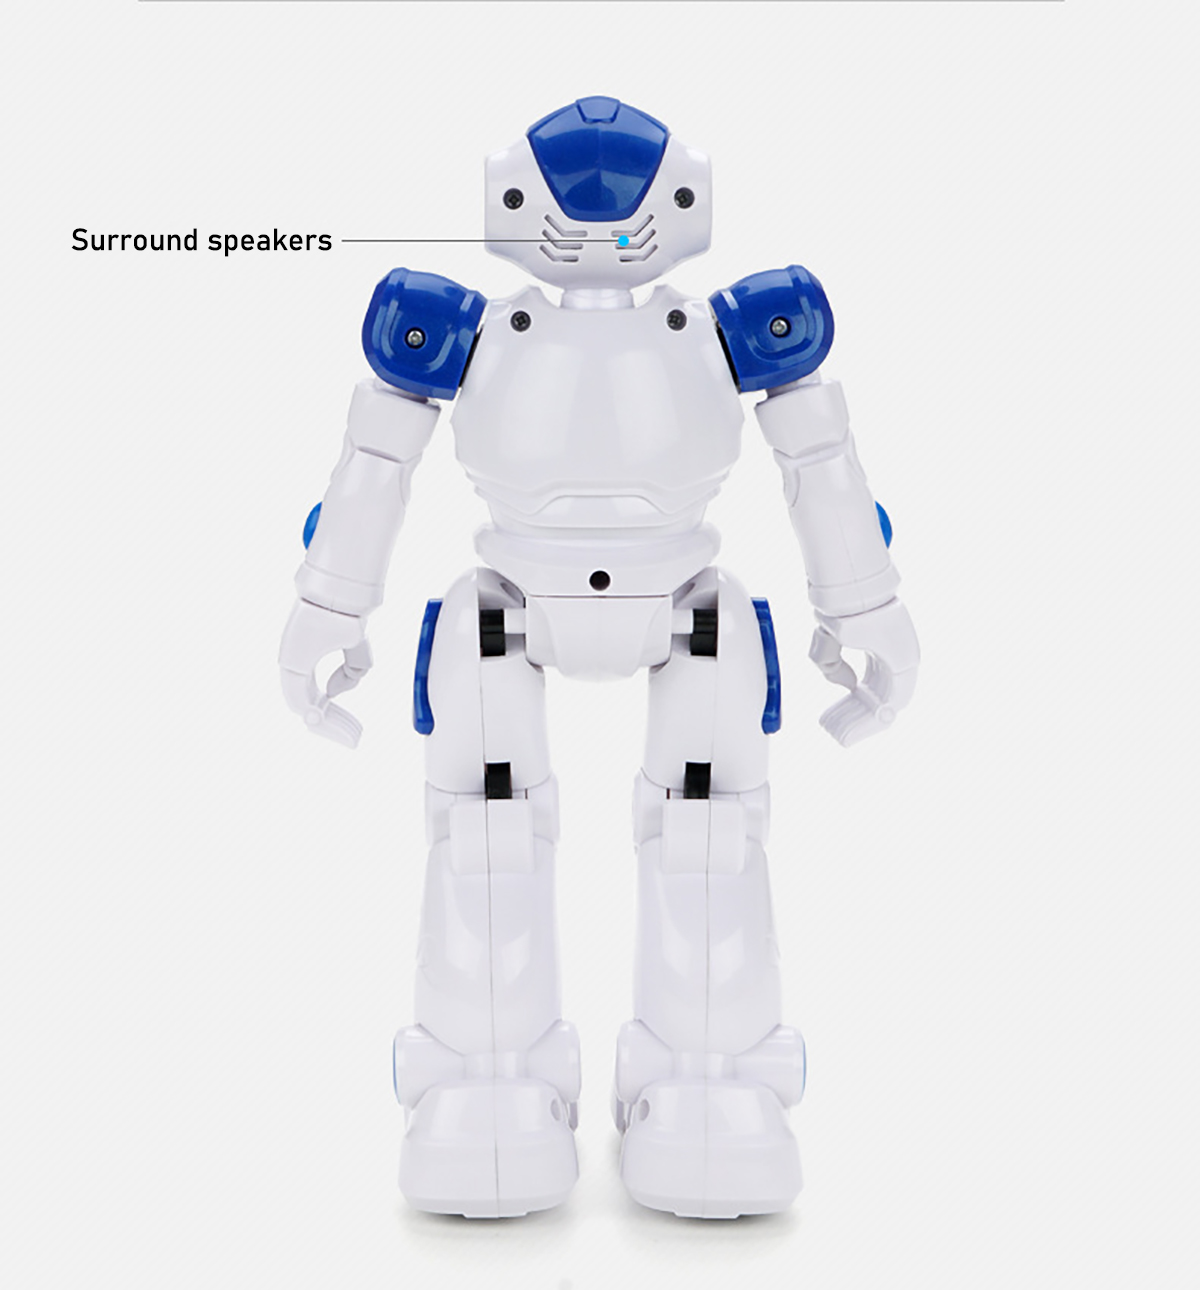 JJRC-R2S-Remote-Control-Programming-Gesture-Induction-Dancing-Robot-1887329-22